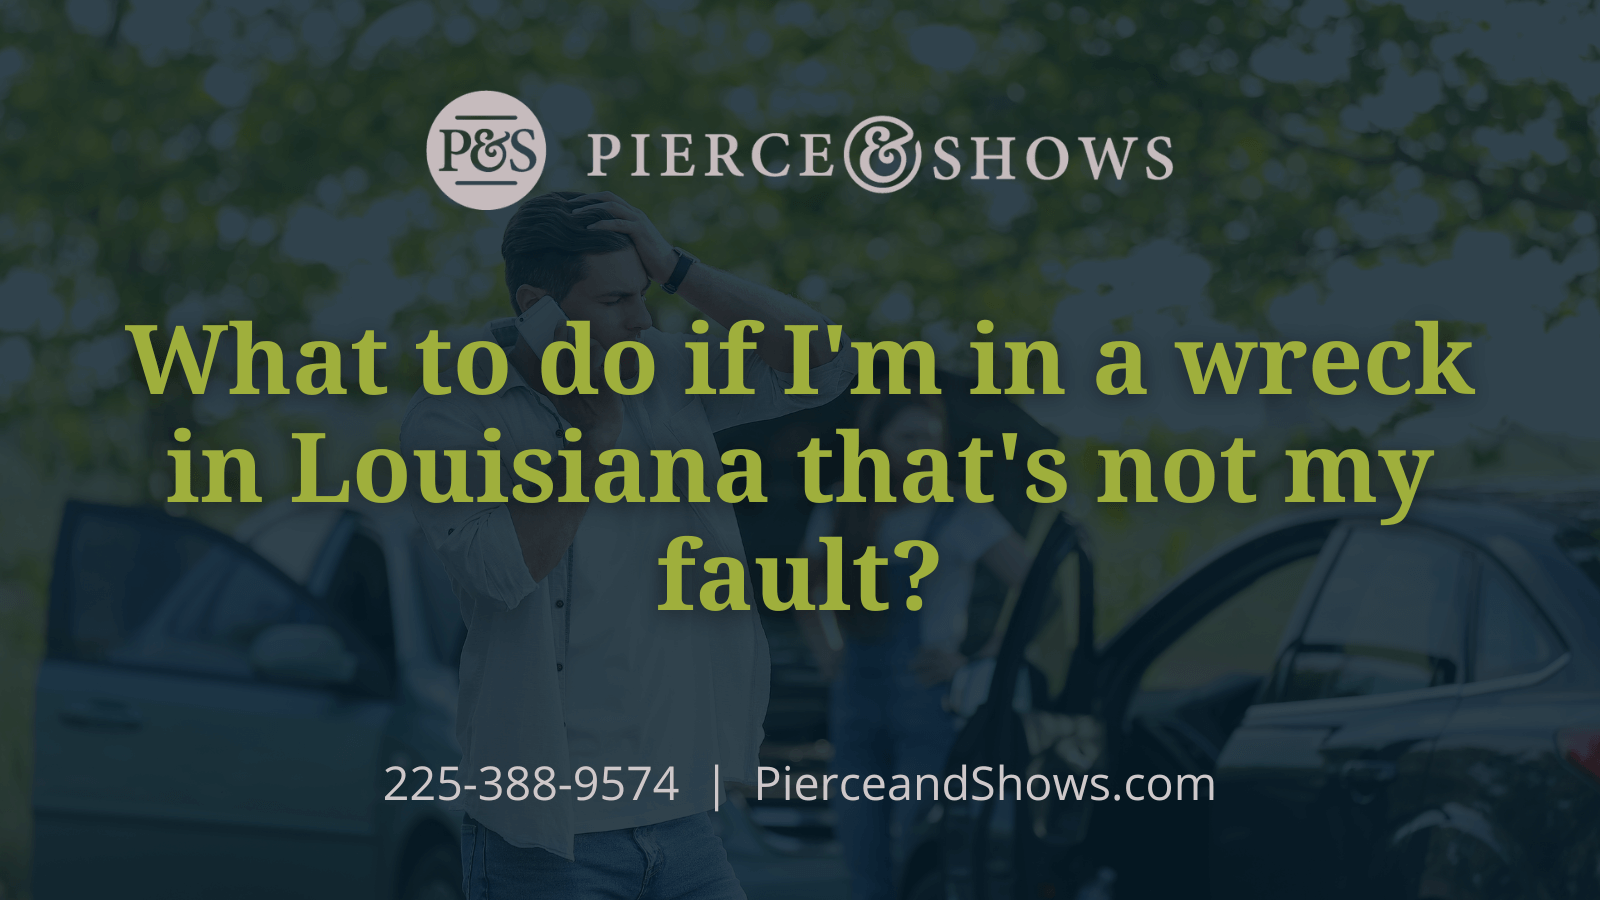 What to do if I'm in a wreck in Louisiana that's not my fault - Baton Rouge Louisiana injury attorney Pierce & Shows